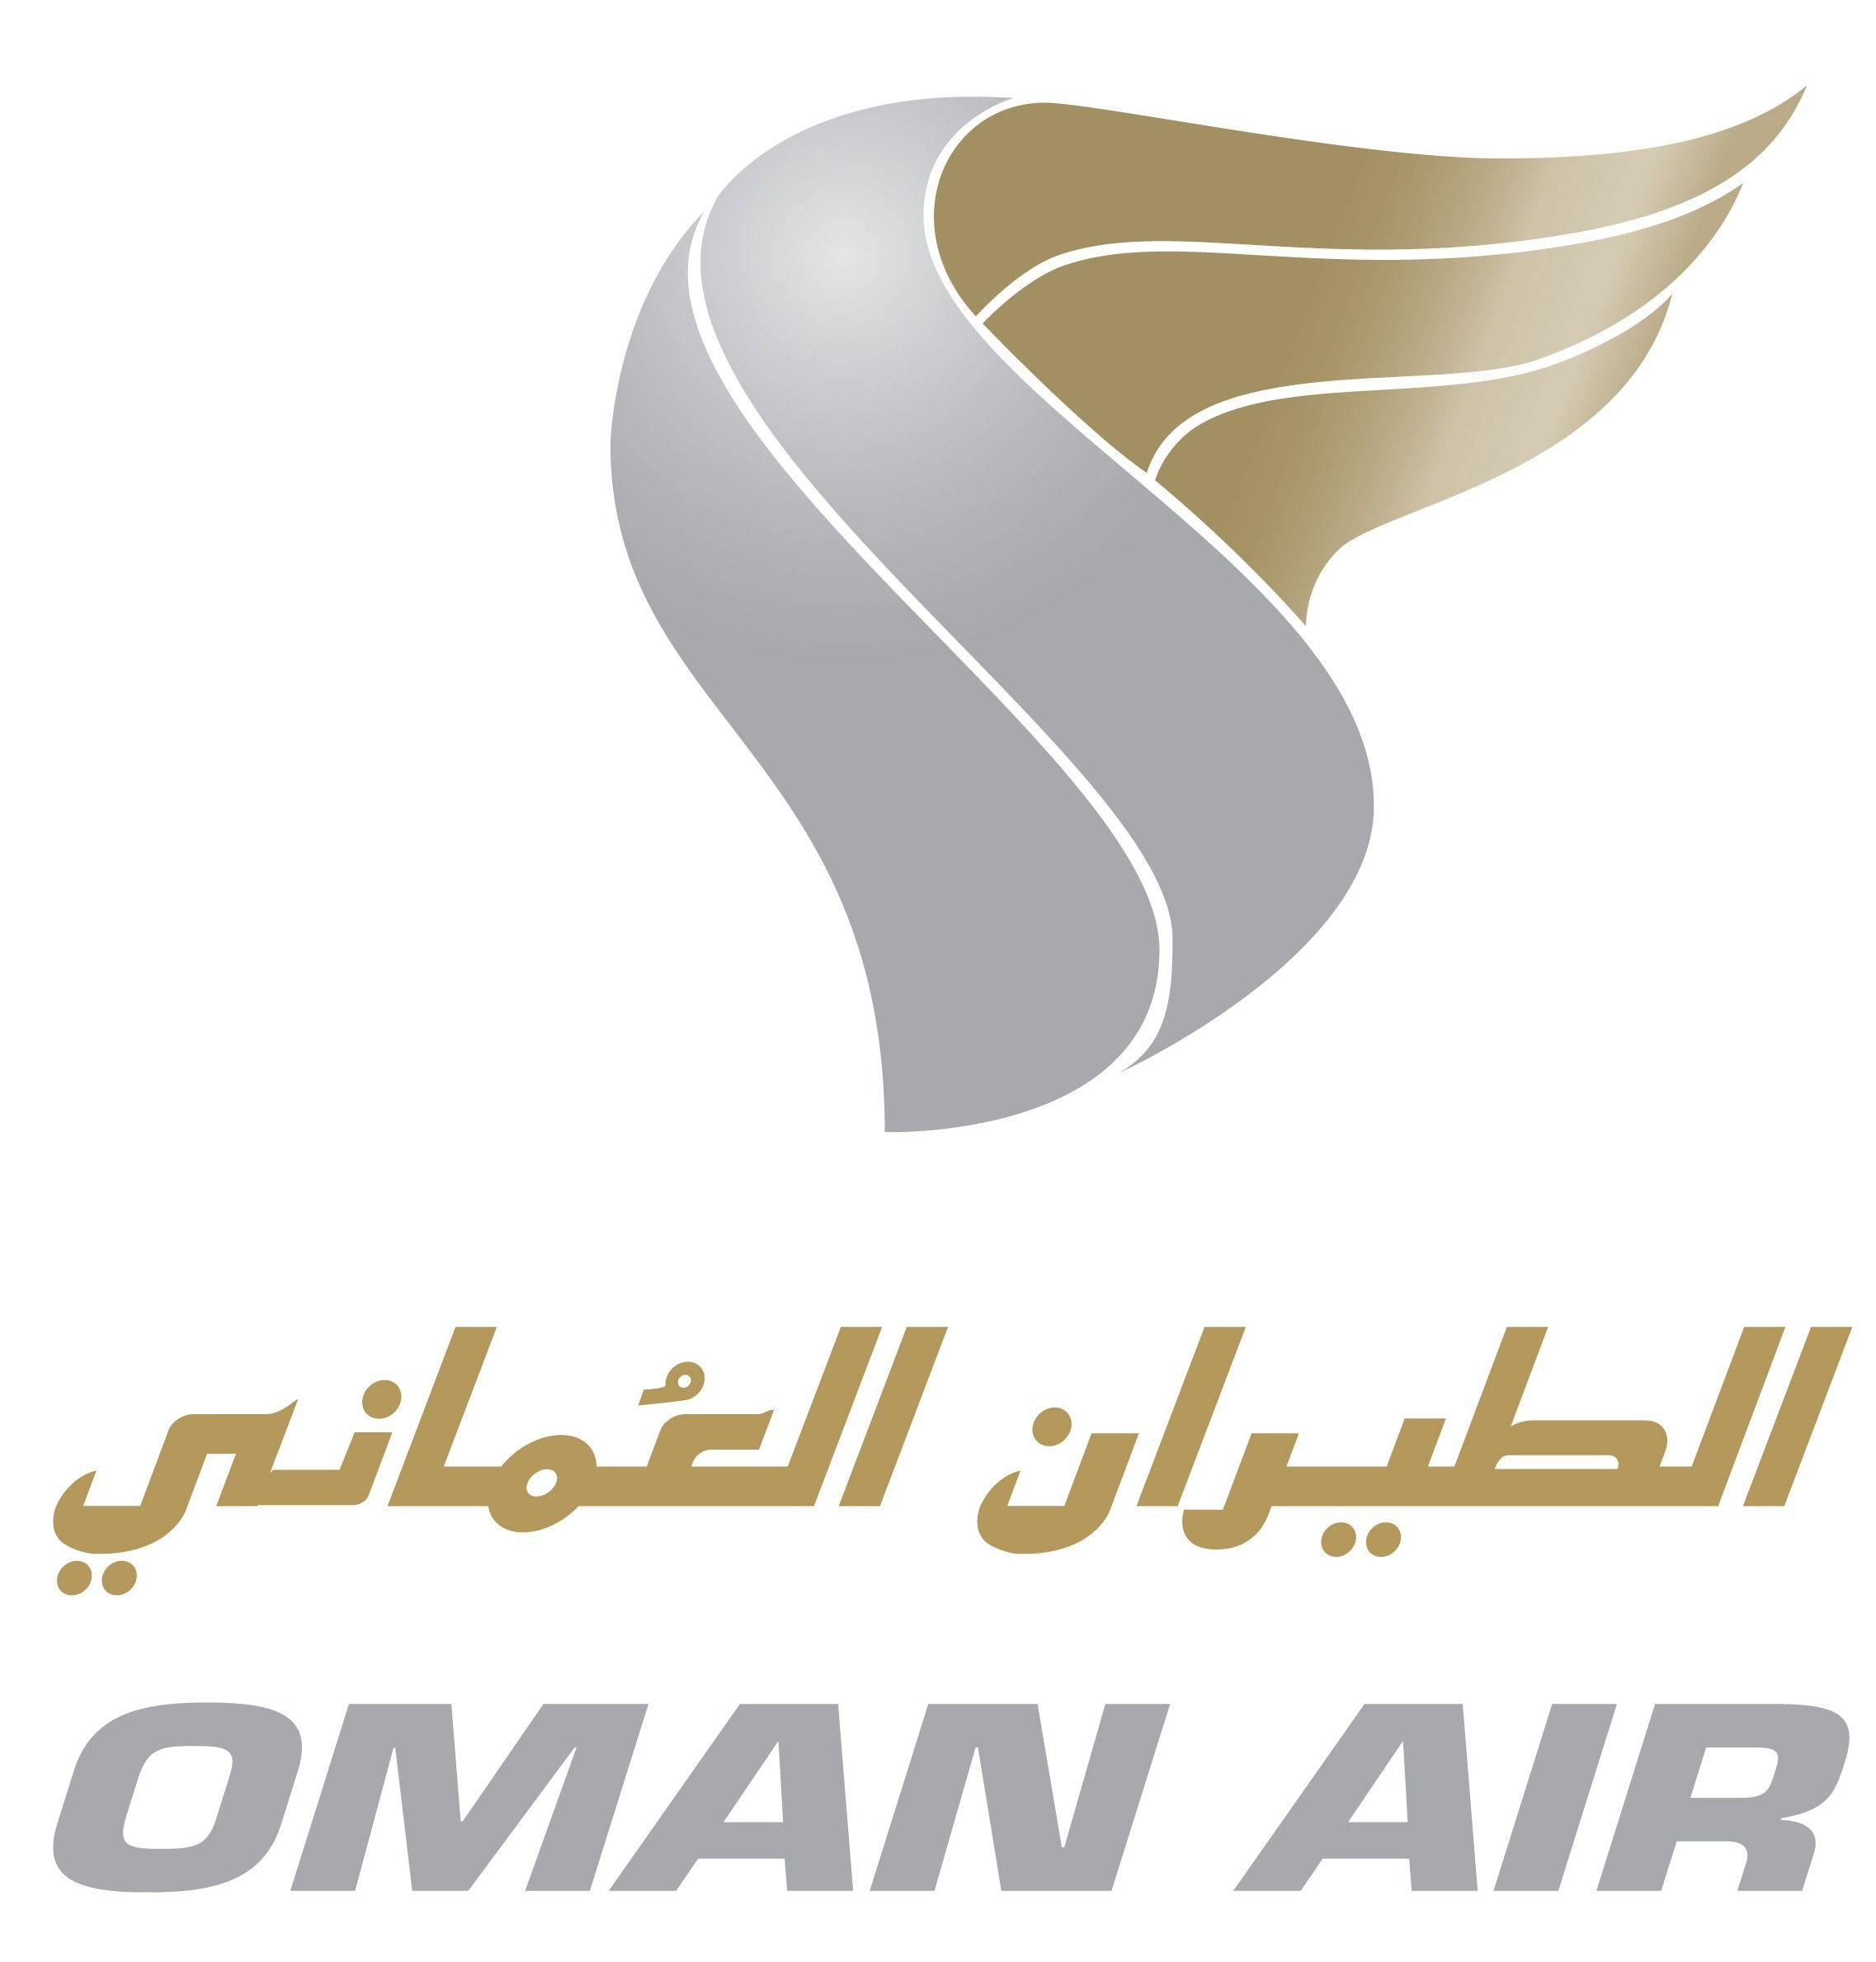 National Airlines Logo - Oman Air. National Airlines Logos. Airline logo, National airlines